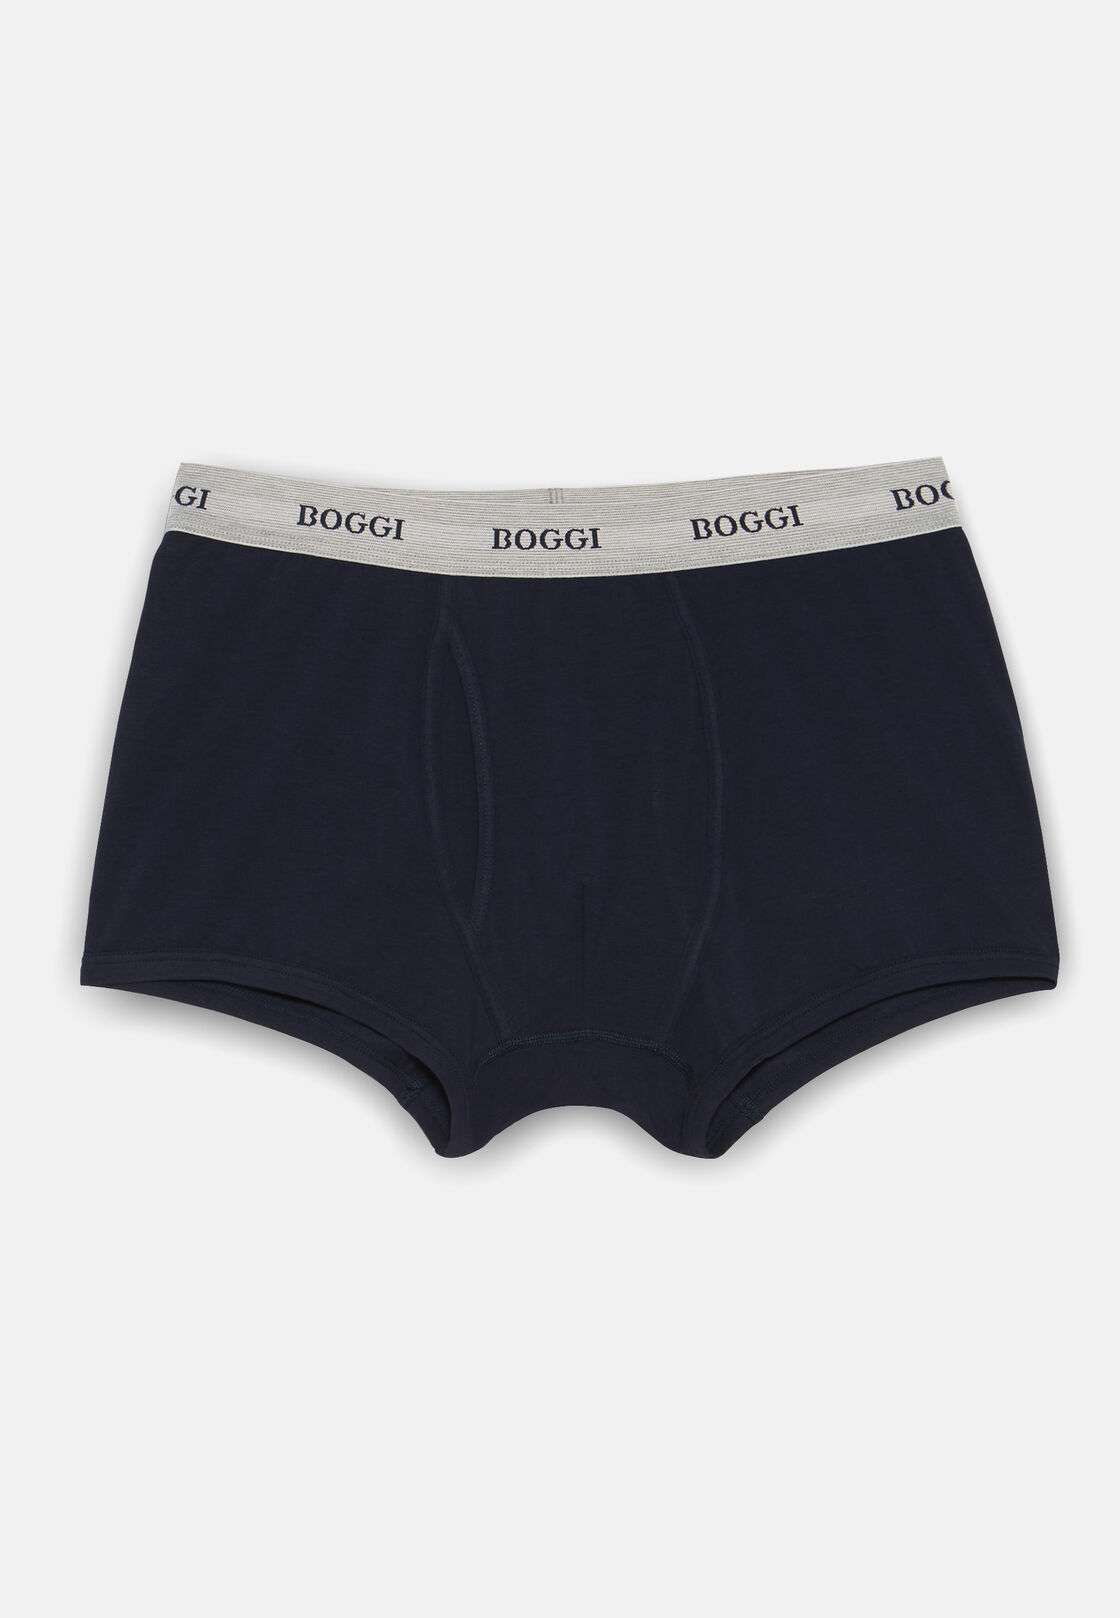 Cagi Men's ribbed cotton briefs: for sale at 12.99€ on